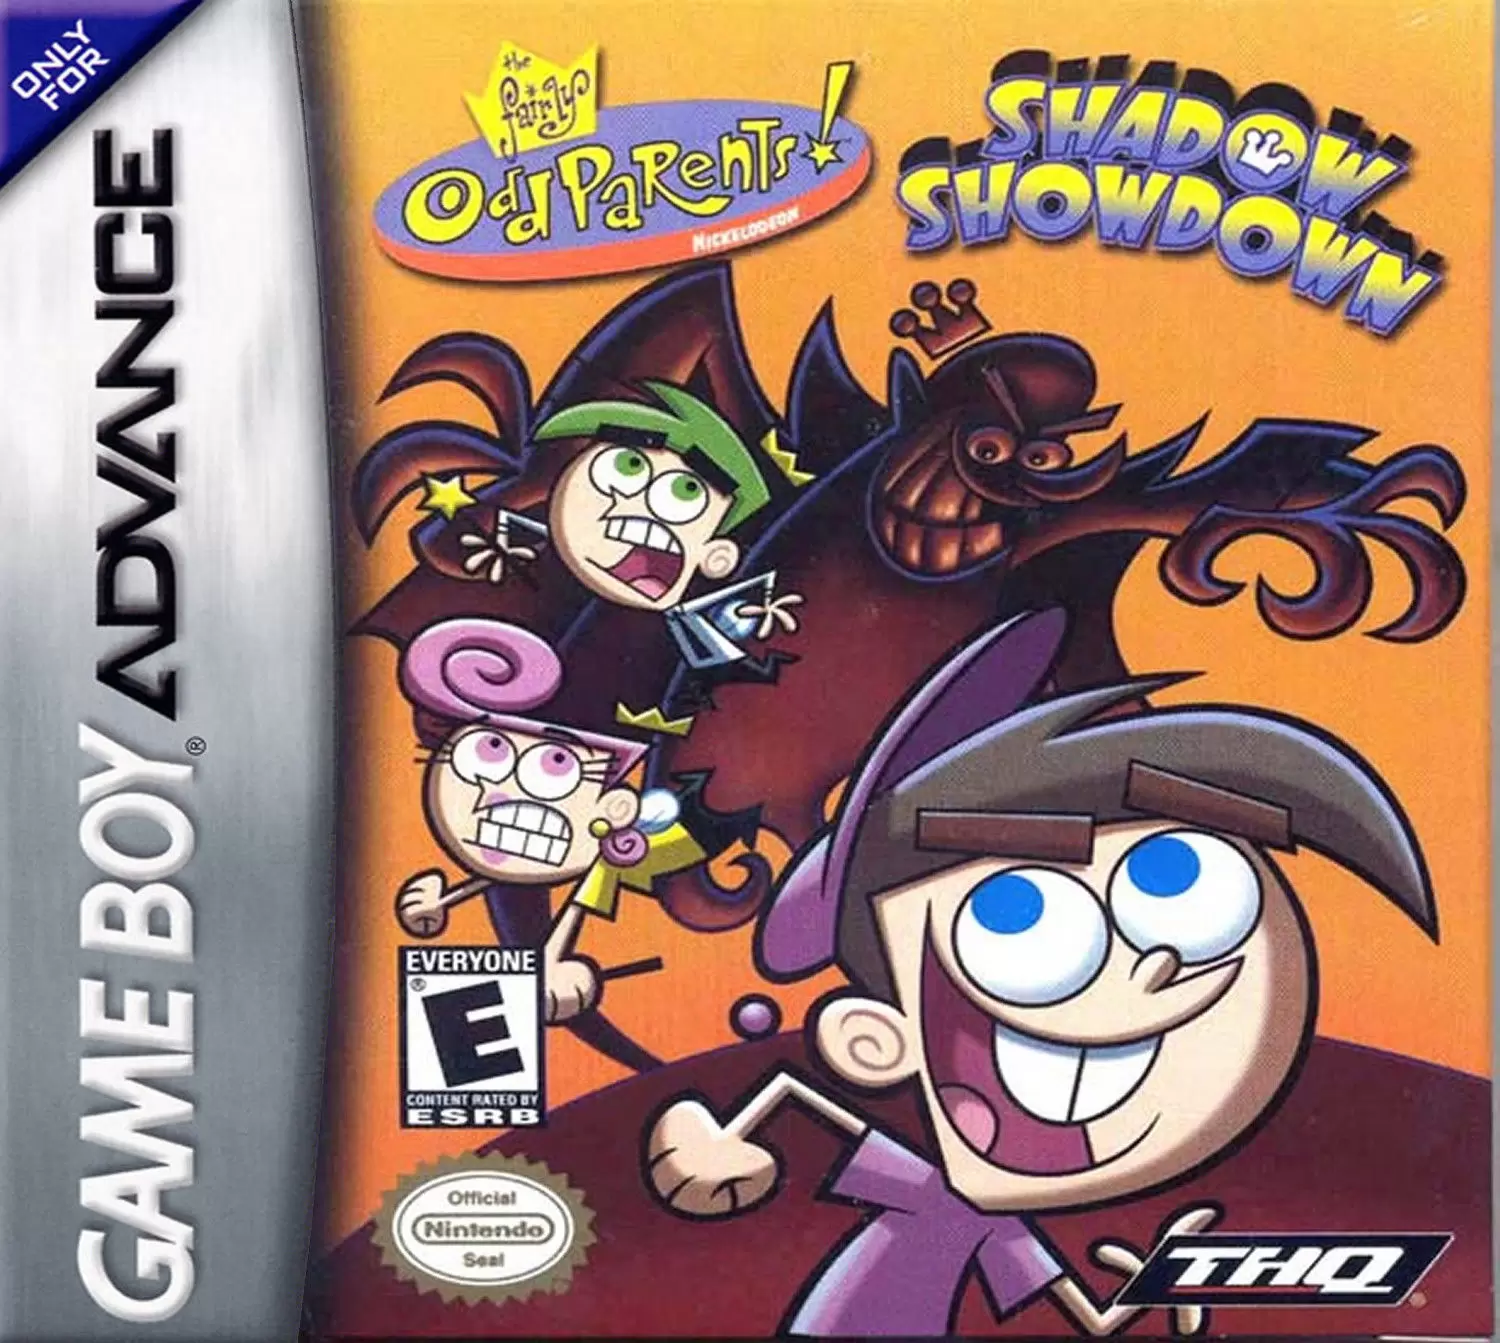 Game Boy Advance Games - The Fairly OddParents! Shadow Showdown